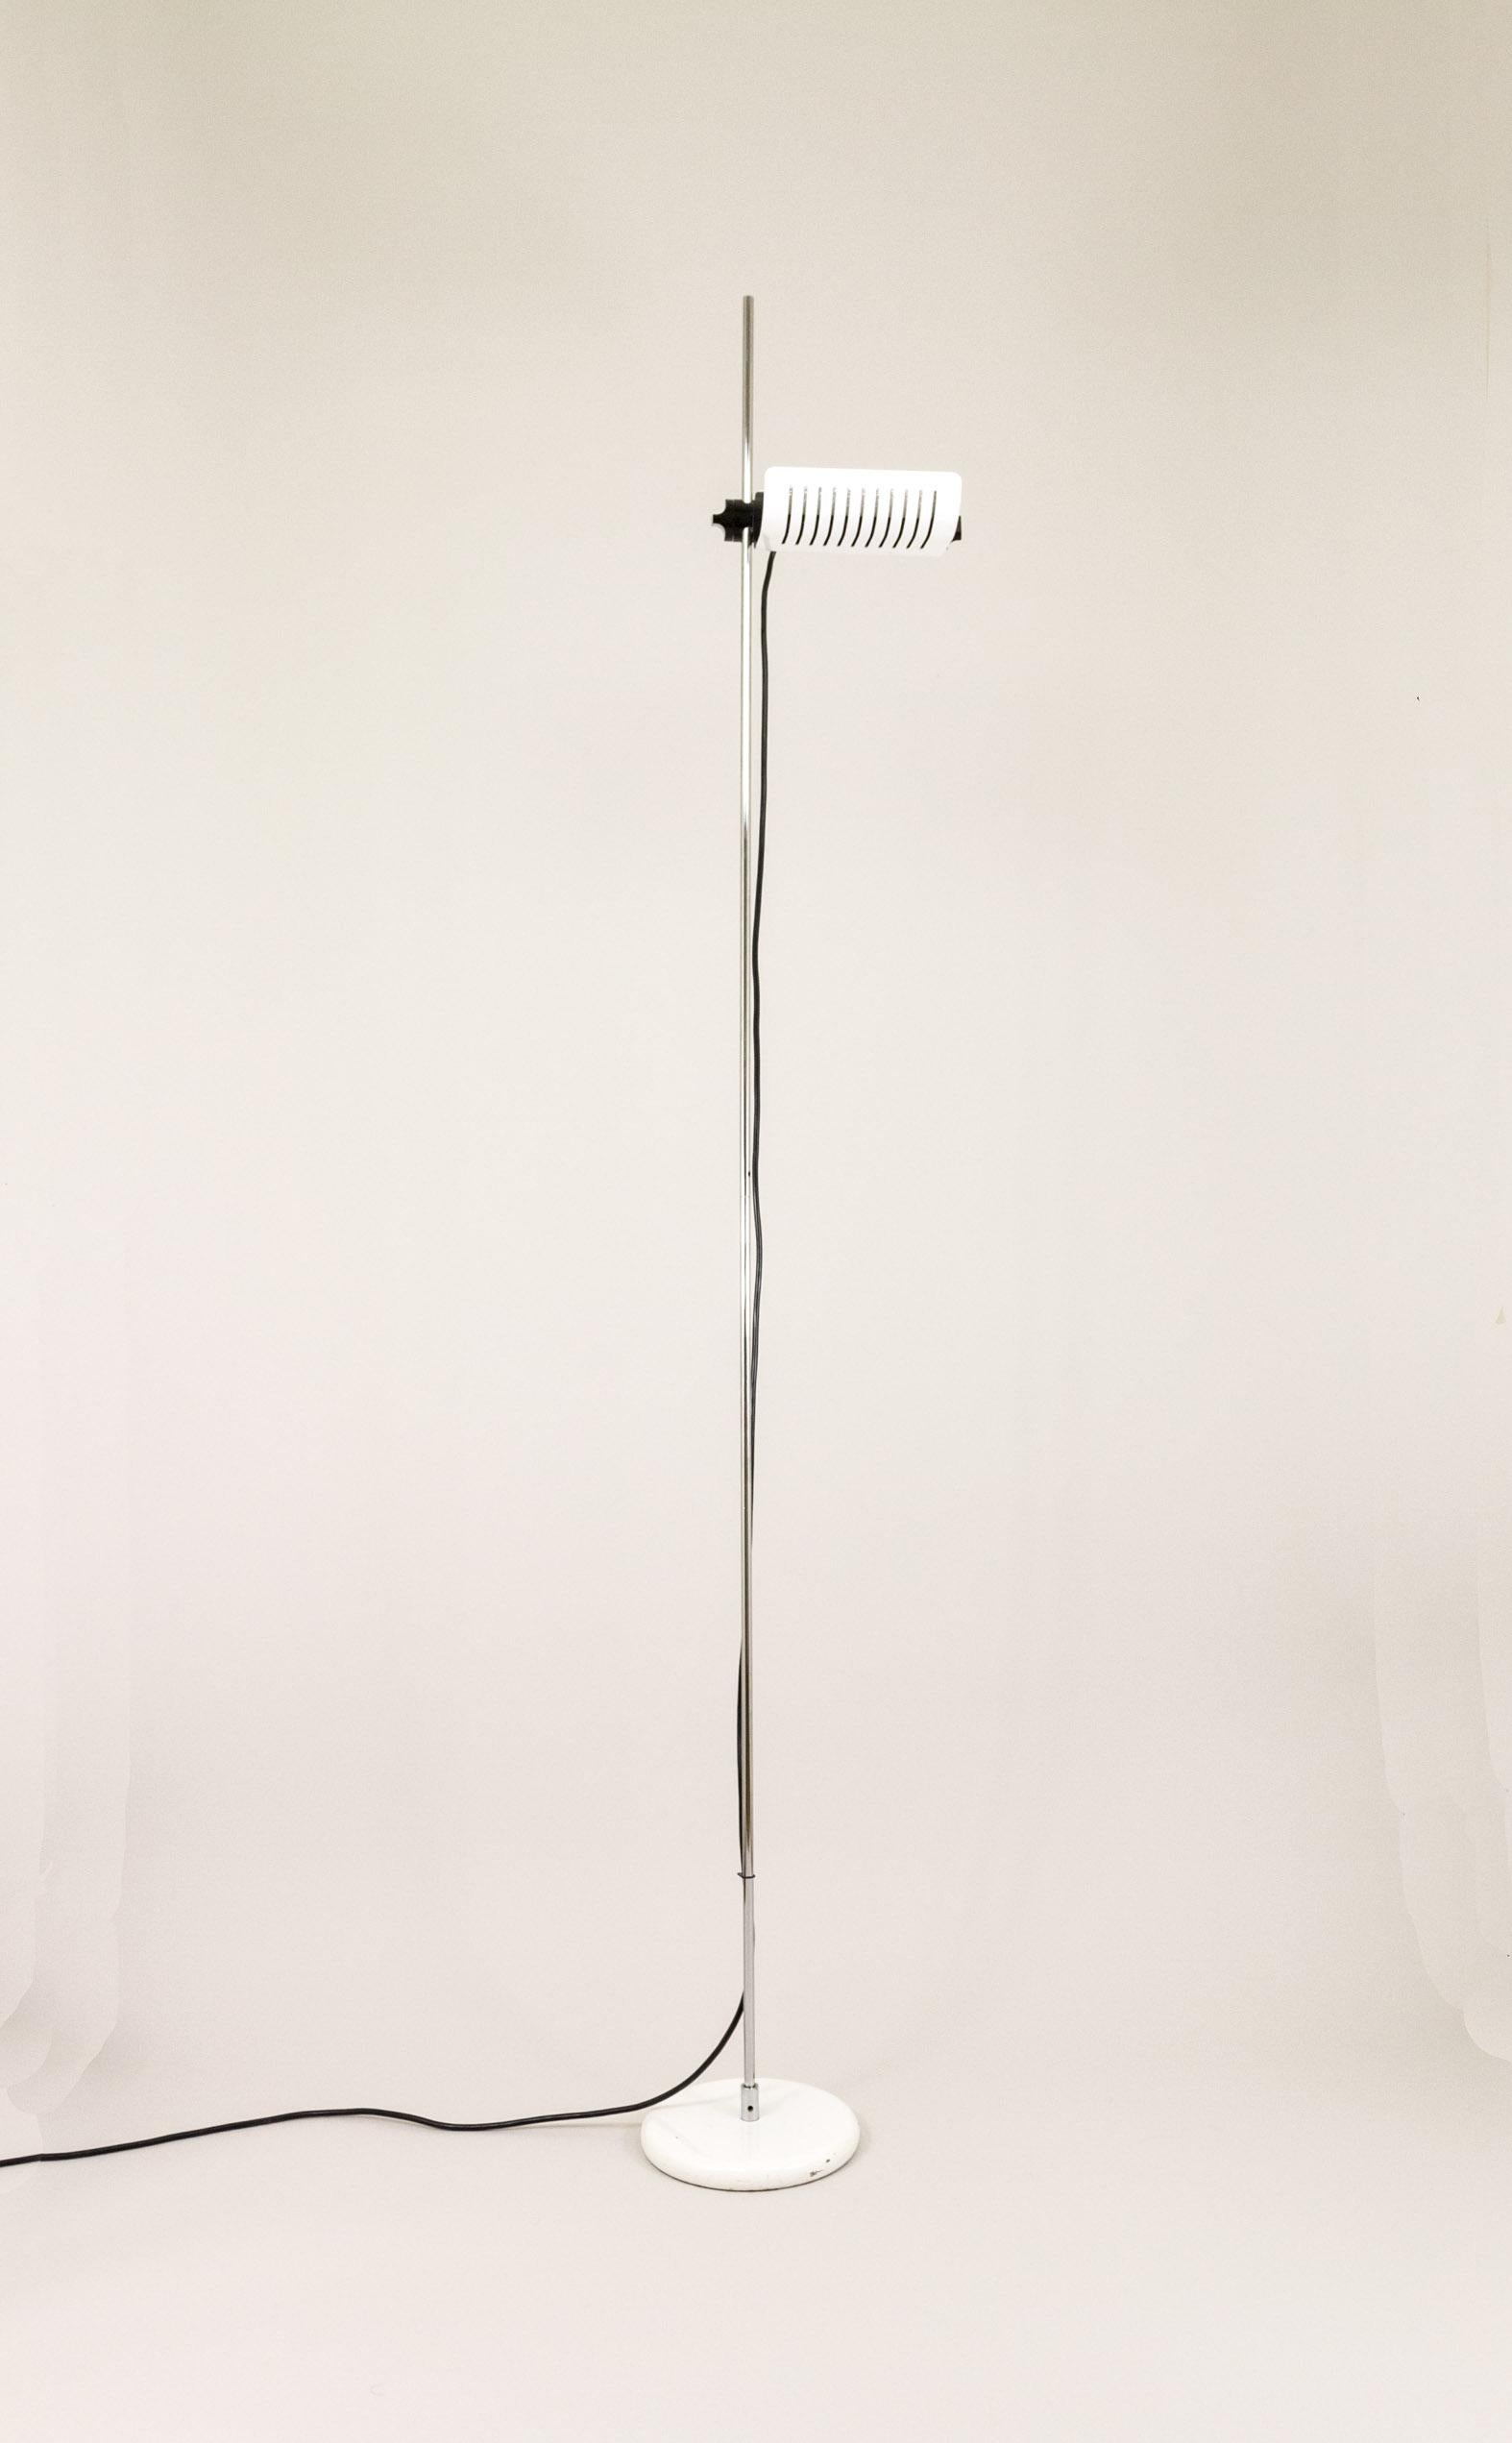 In 1970 Joe Colombo designed Model 626, a floor lamp immediately nicknamed ‘Alogena’ or ‘Colombo’.

According to MarCo Romanelli, author of the book ‘Joe Colombo: Lighting Design + Interior Design’, Model 626 “was the first domestic light with a